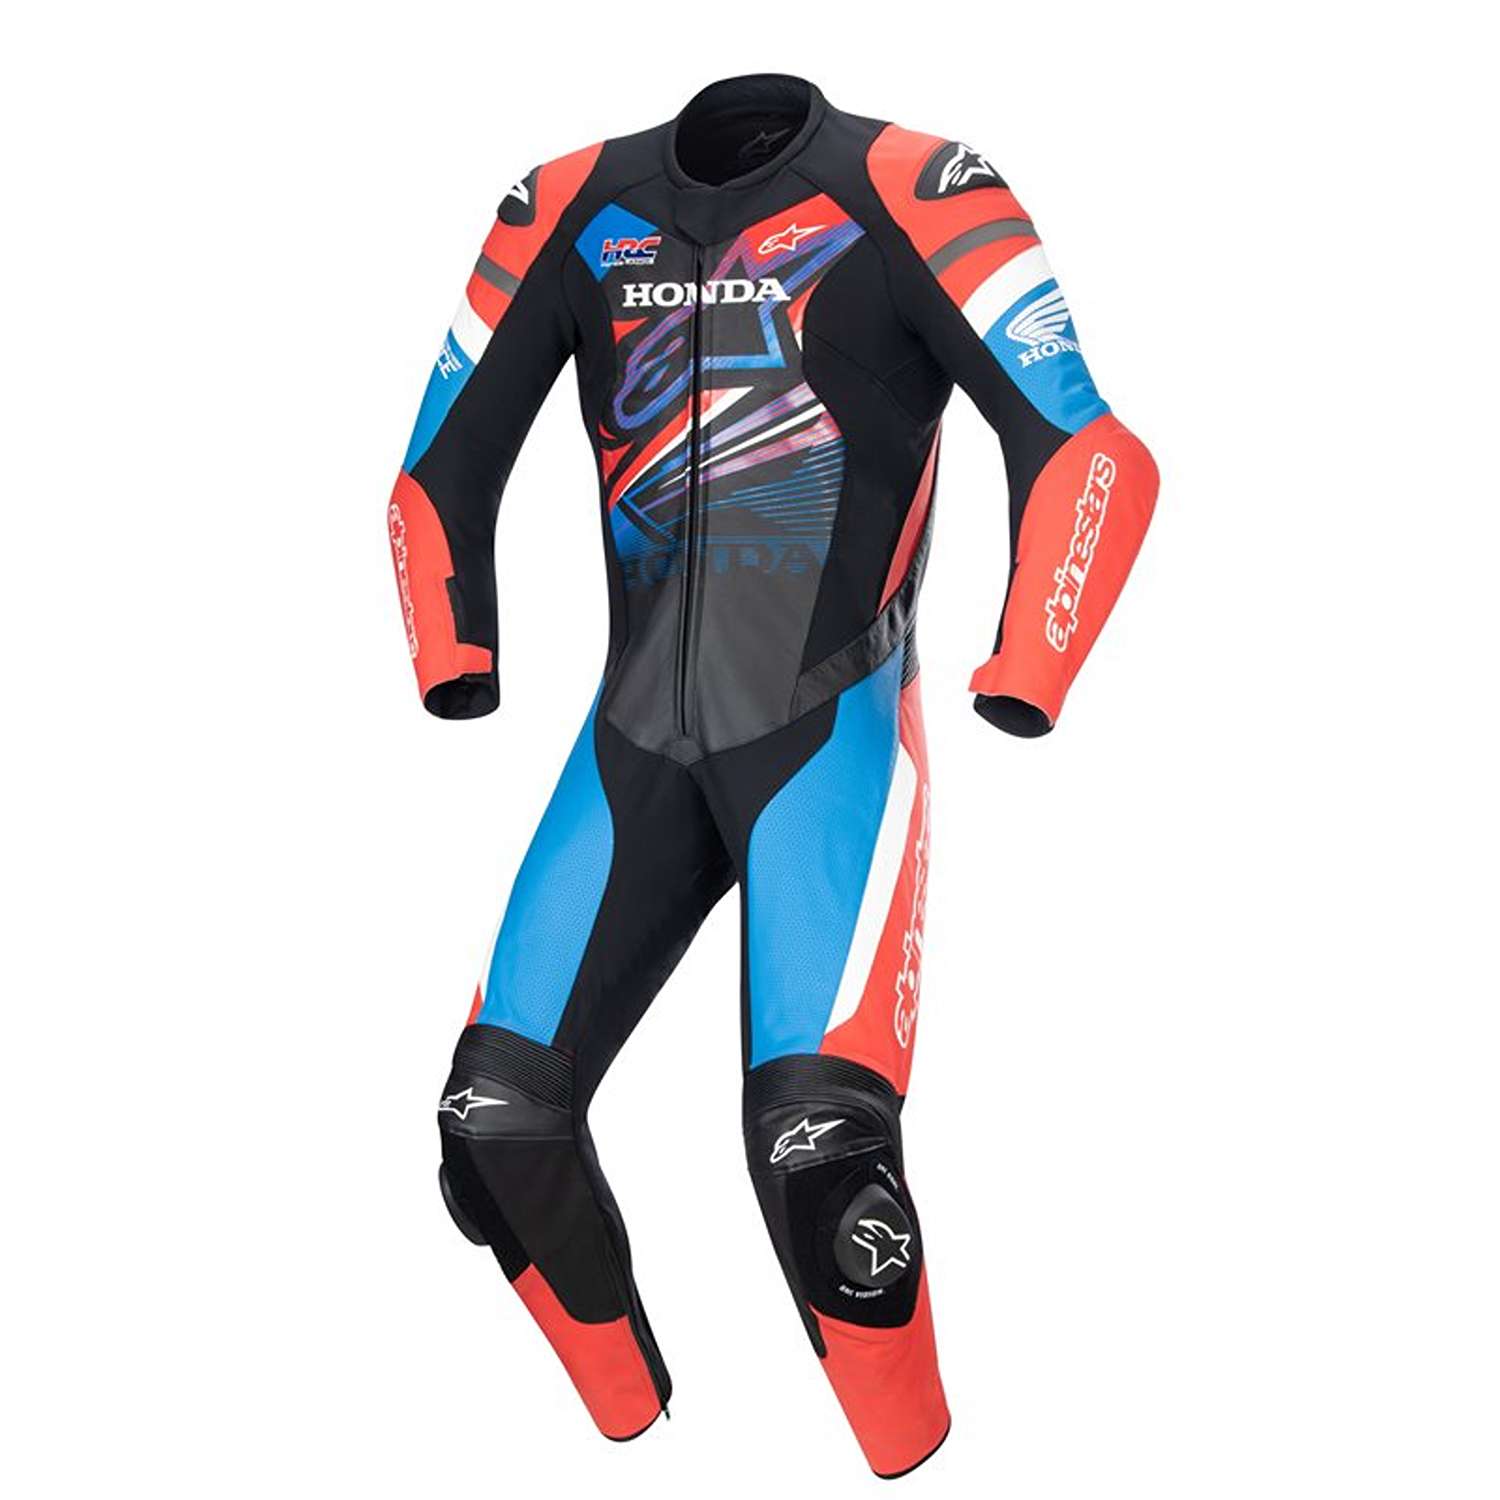 Image of Alpinestars Honda Gp Force Leather Suit Black Bright Red Blue Size 56 ID 8059347160320